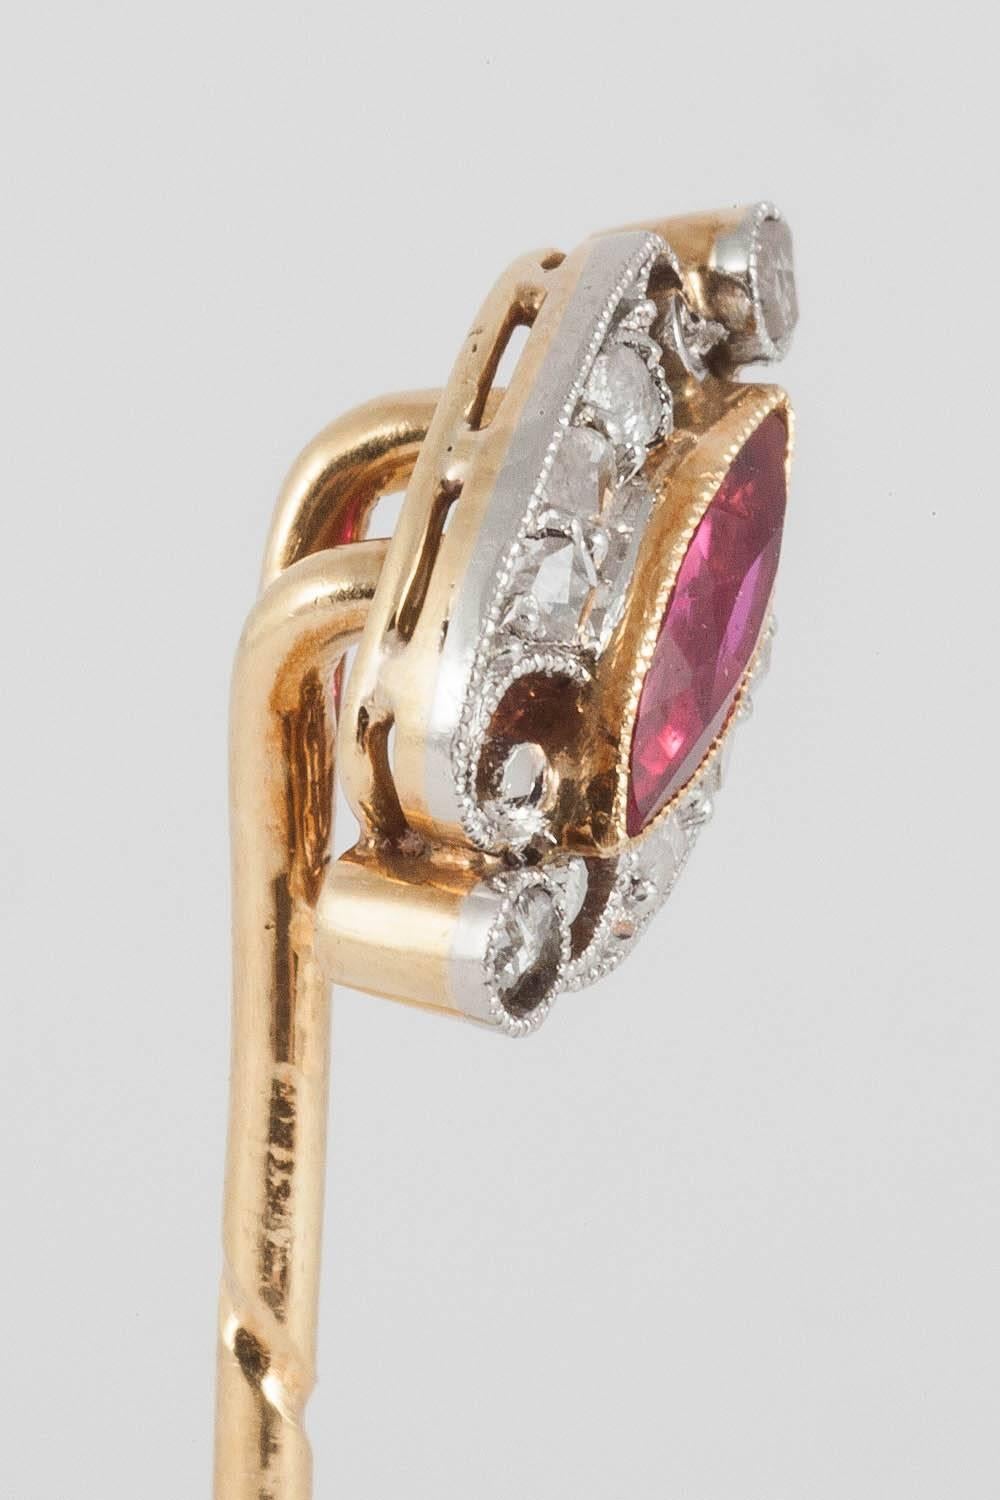 A good quality Burma Ruby of marquise shape in a surround of small rose cut diamonds, mounted as a tie pin, angled in design, set in platinum and 18 carat yellow gold.
Measures 10mm across.
Antique piece (over 100 years old) from the Edwardian